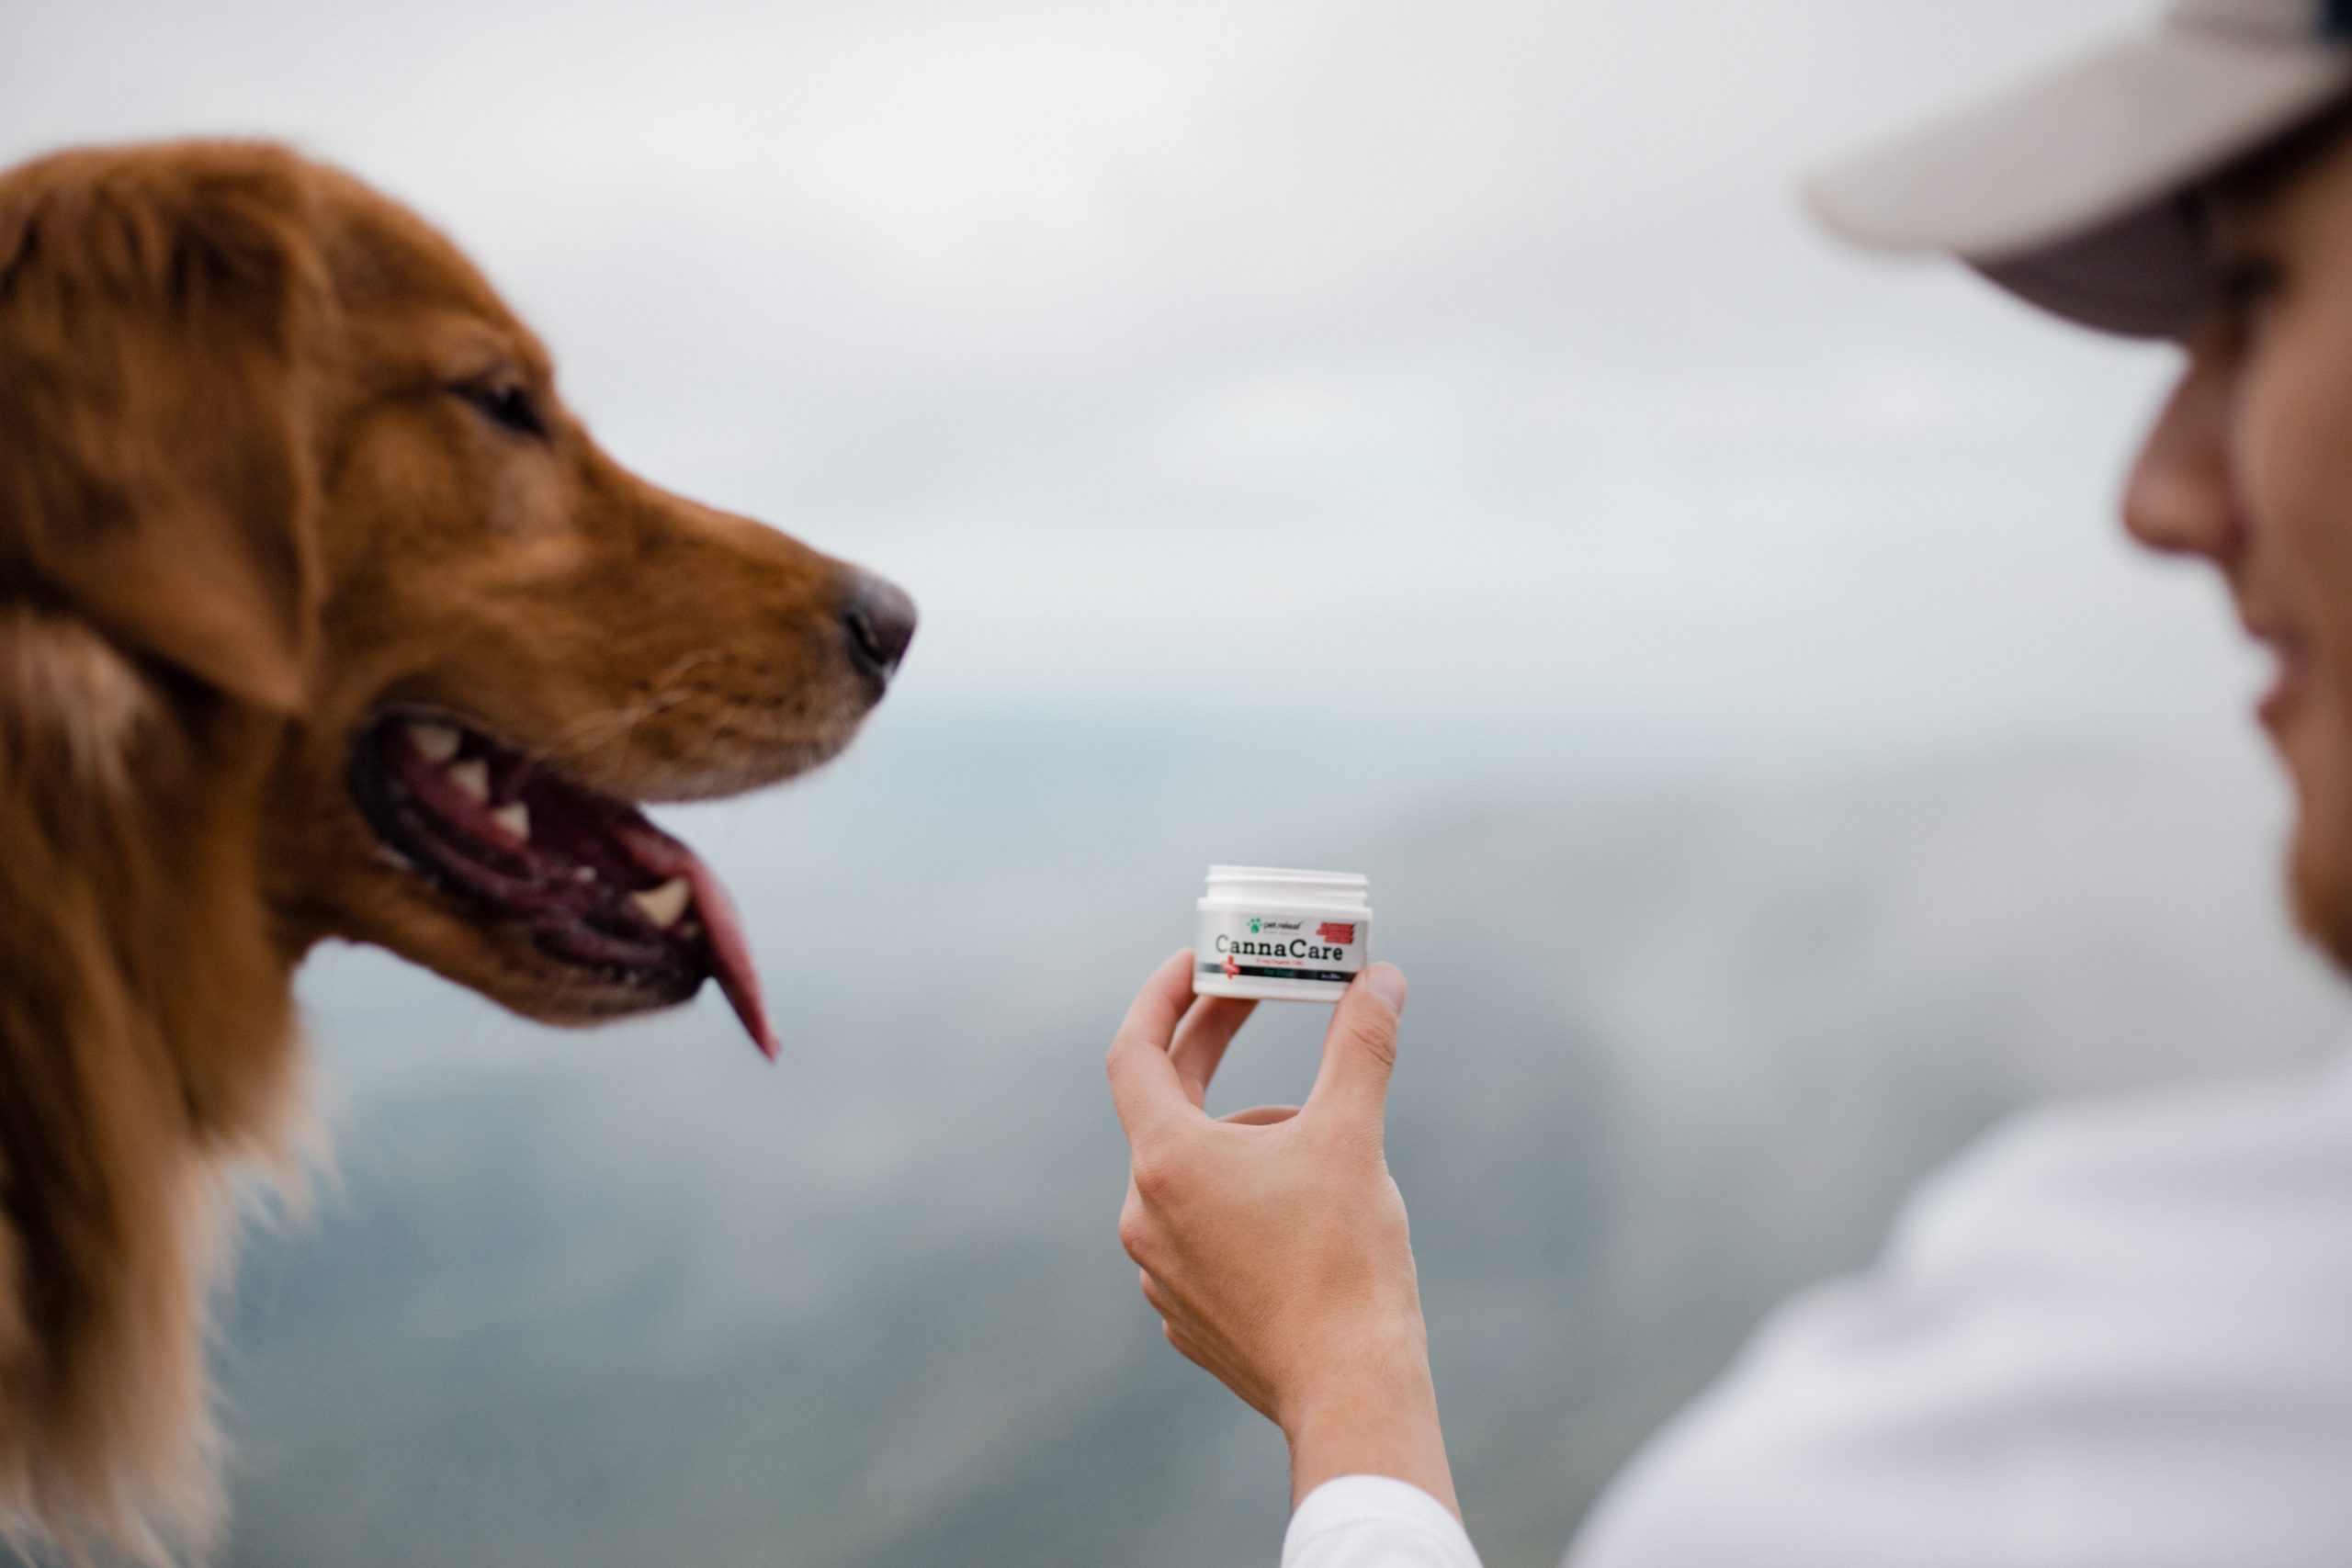 Pack the Essentials: Pack pet travel essentials like Canna Care